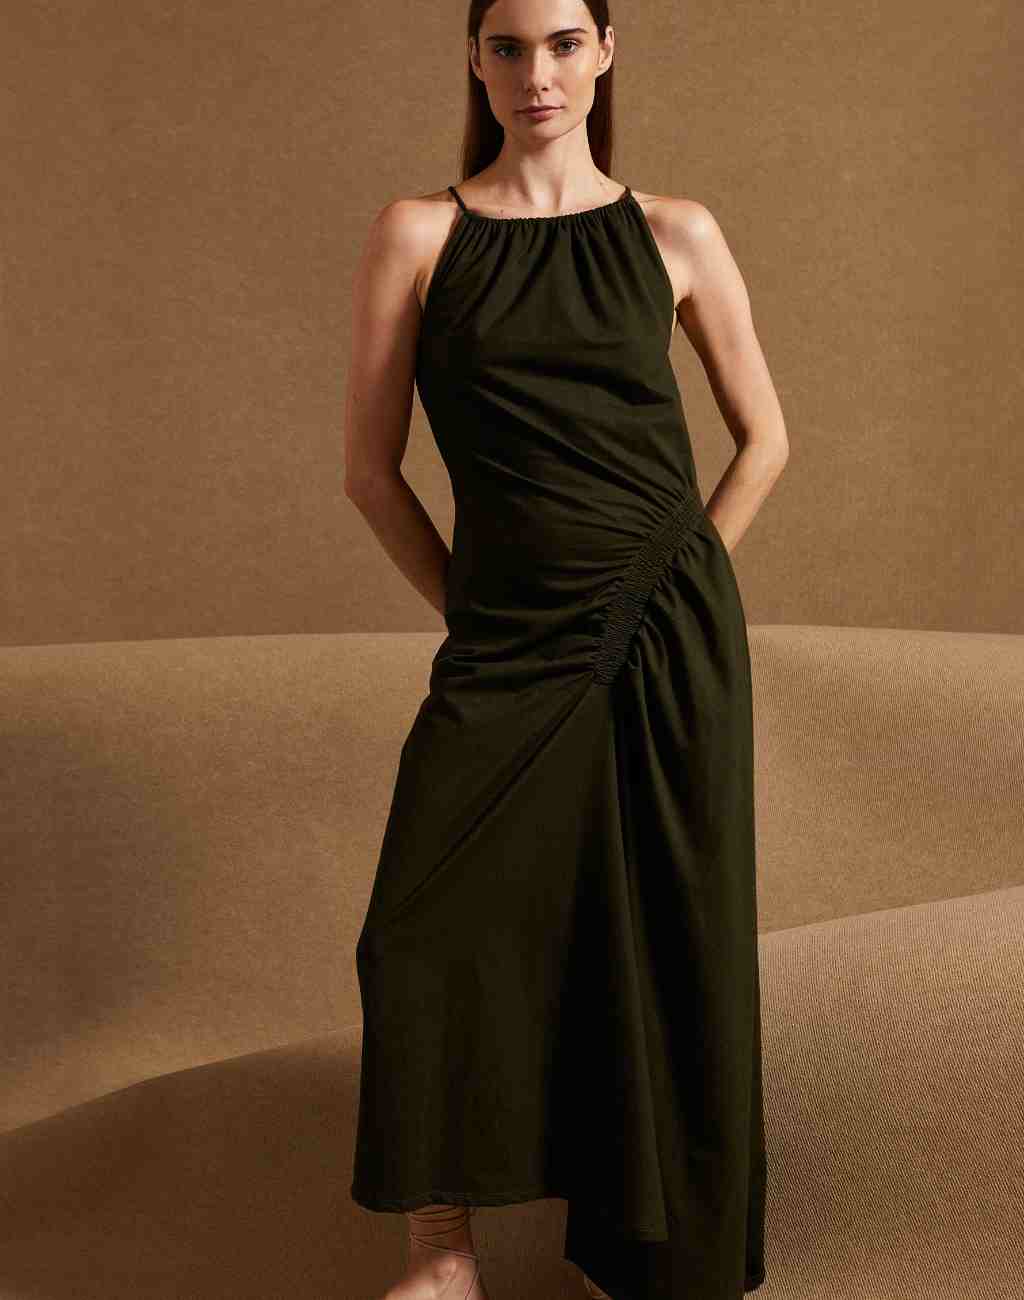 Diario Midi/Maxi Dress with Ruched Side Detail and Tie Neck - Visit Nifty Fasce 